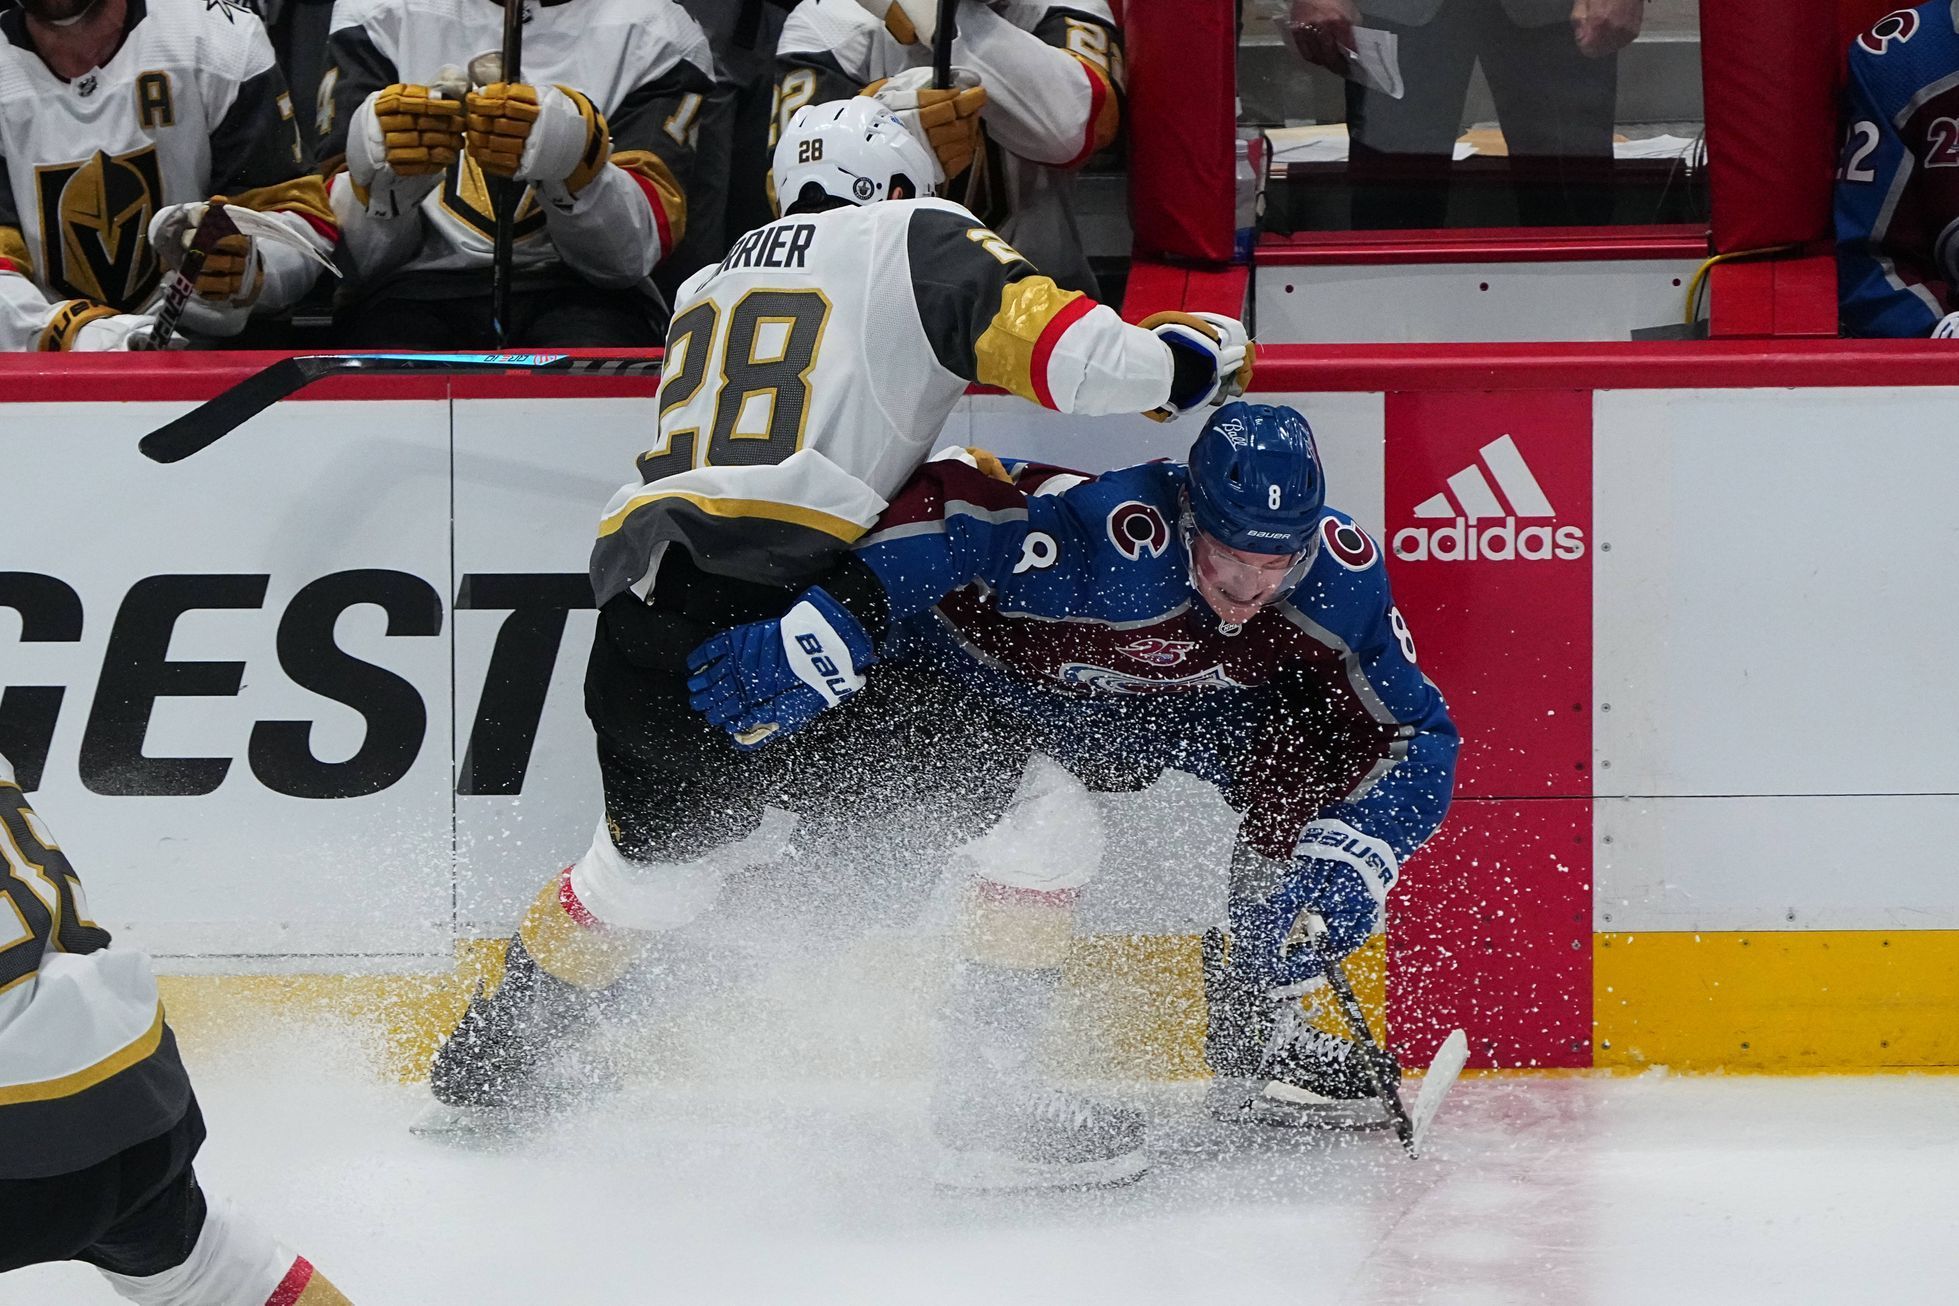 hokej, NHL 2021, Stanley Cup Play off, Vegas Golden Knights at Colorado Avalanche, William Carrier, Cale Makar